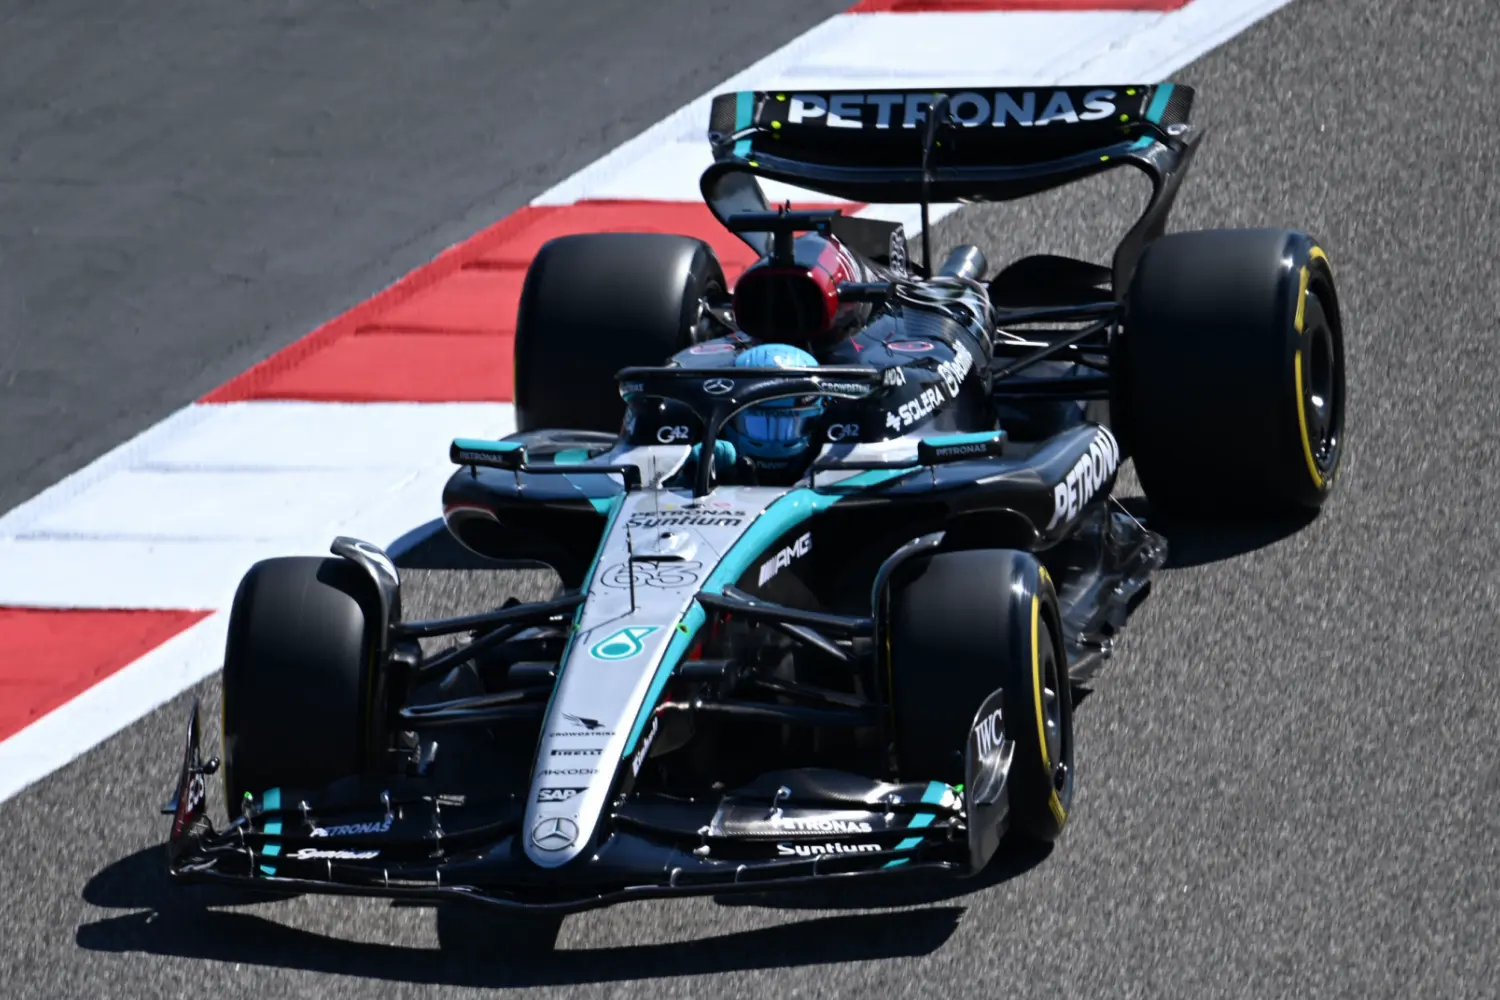 George Russell - Mercedes-AMG Petronas Formula One Team / © Mercedes-AMG Petronas Formula One Team / LAT Images